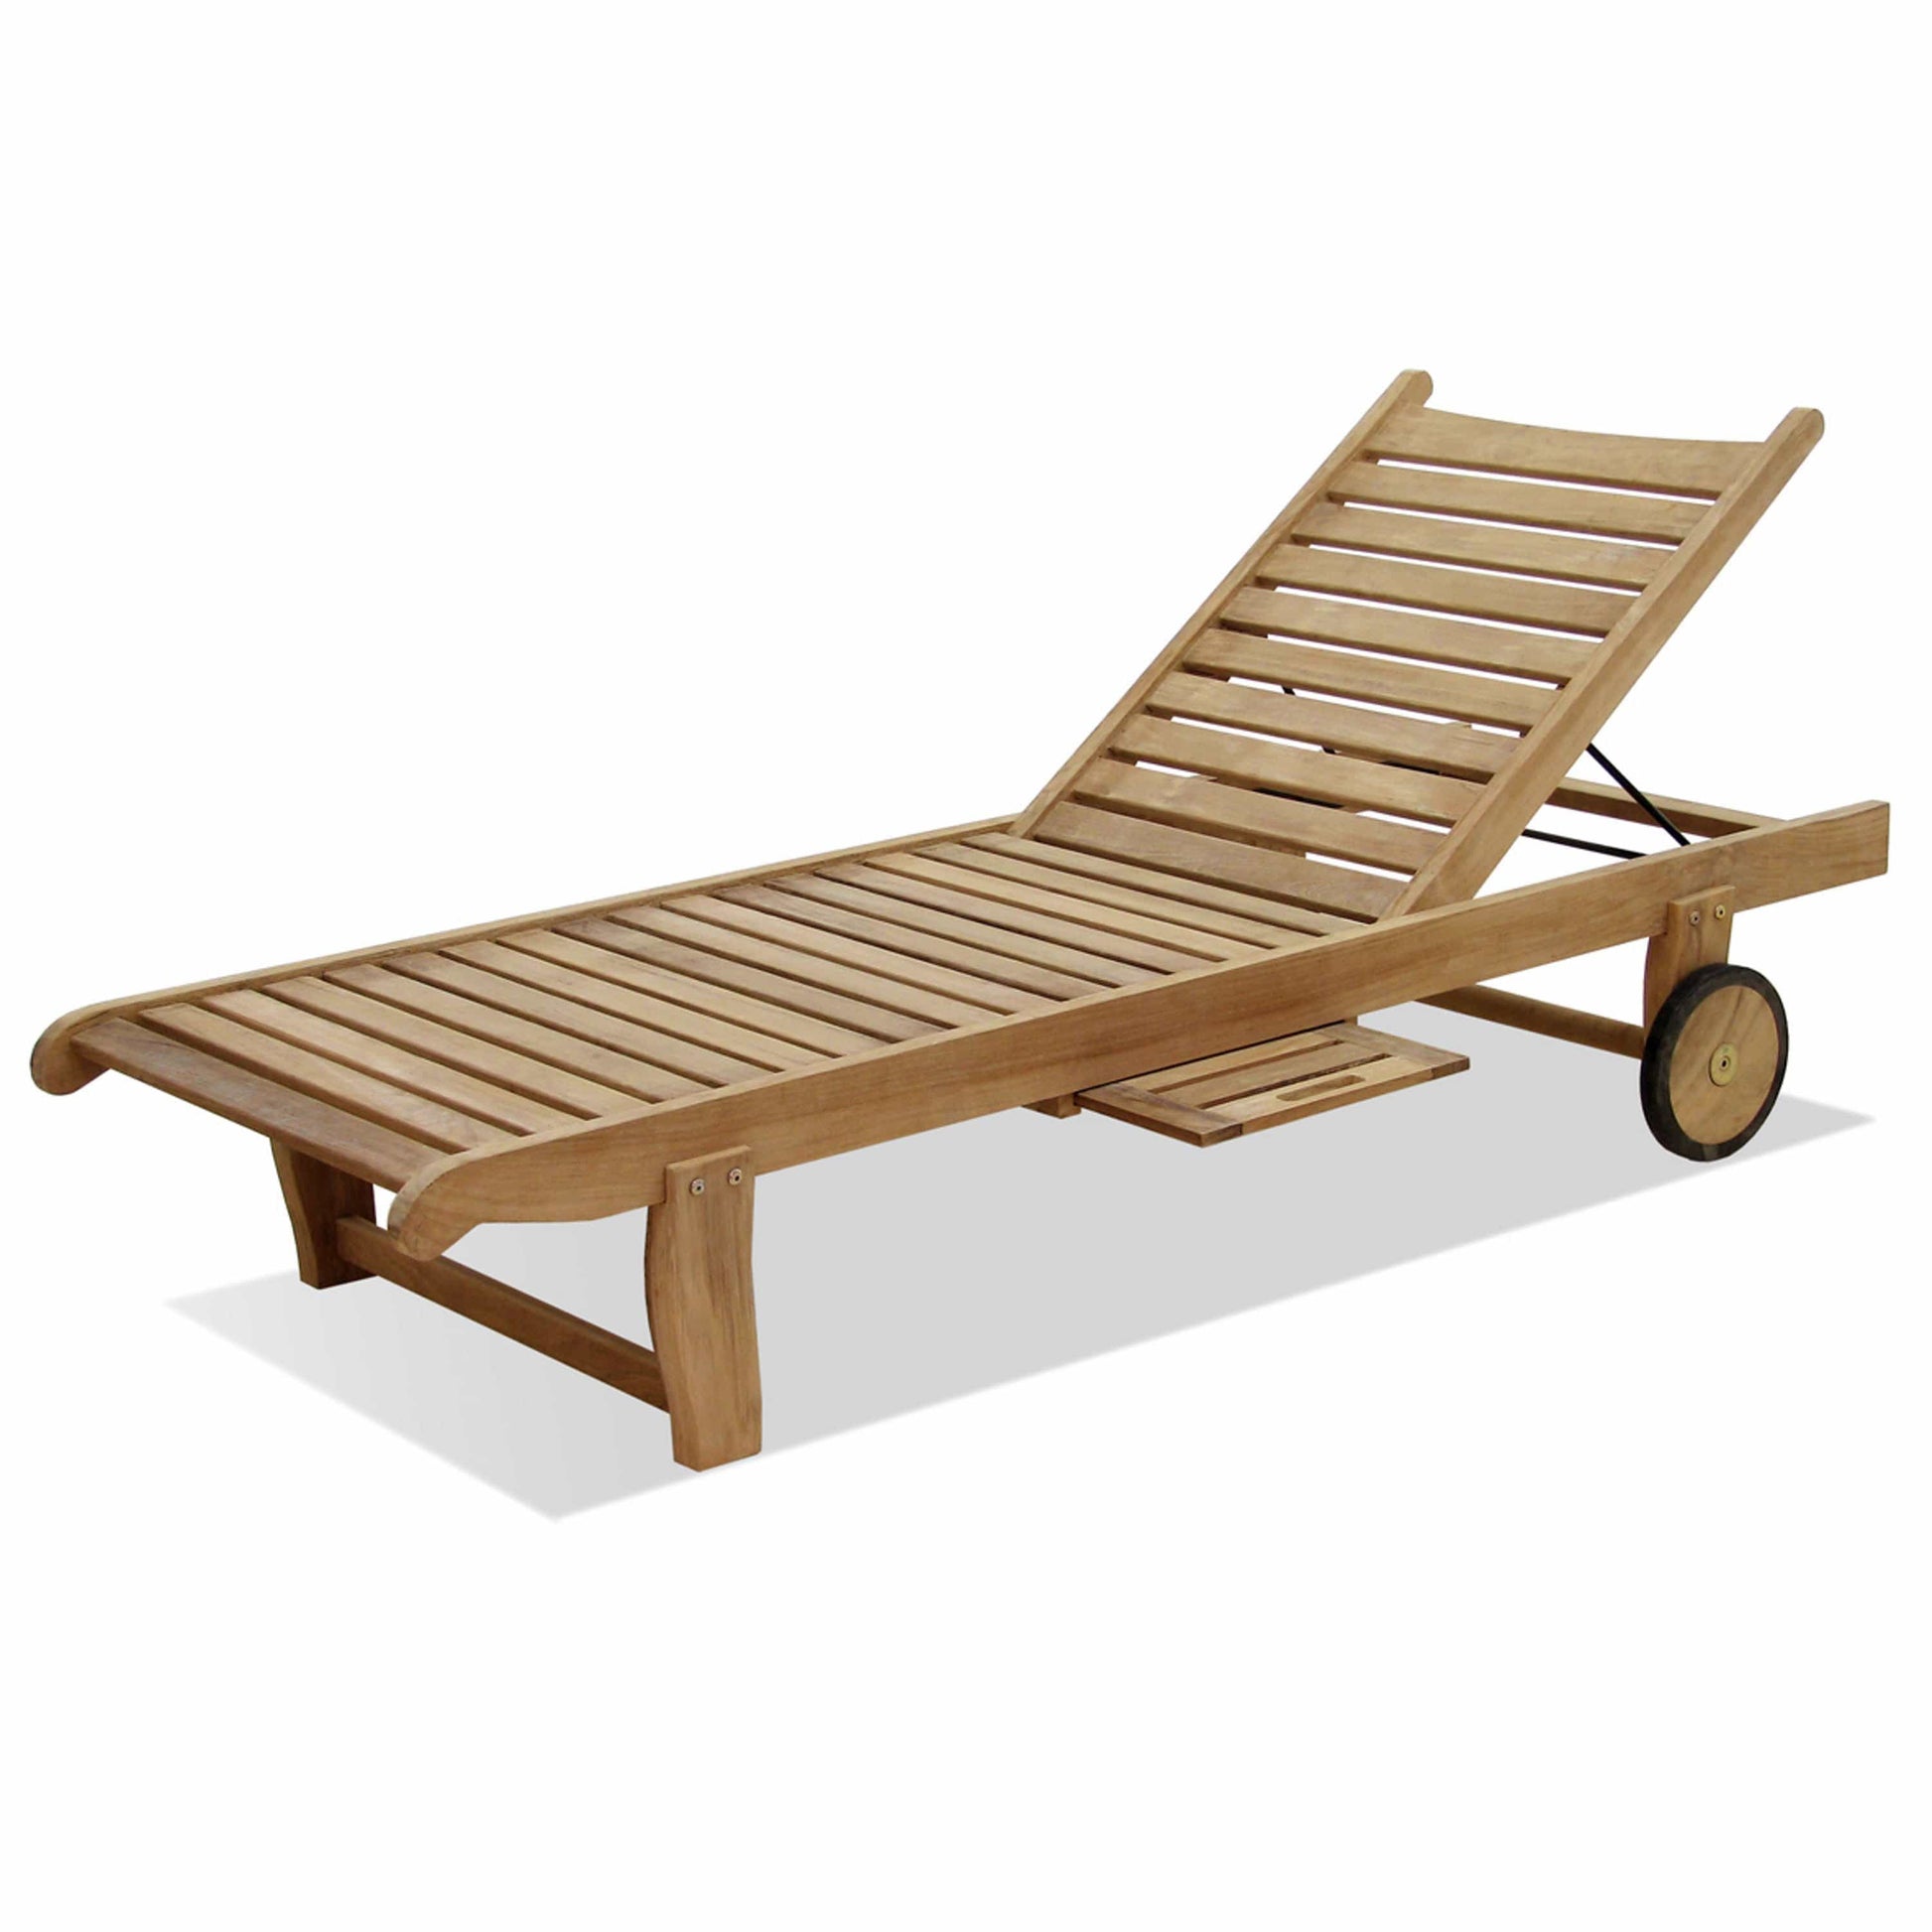 Forever Patio Universal Teak Single Adjustable Chaise Lounge FP-UNIT-2030-SACL-Teak Seating Forever Patio 